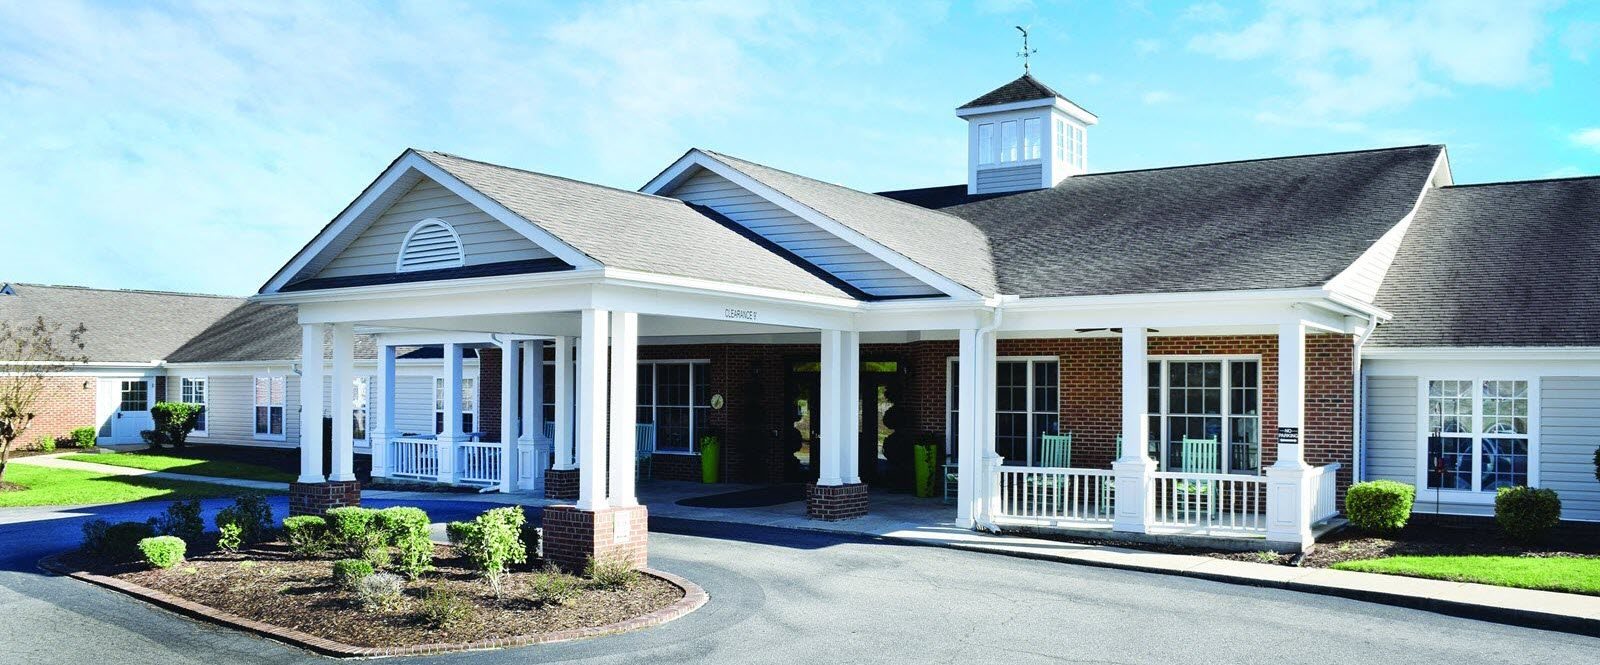 Senior Care Facility Entrance at Spring Arbor of Rocky Mount in Rocky Mount, NC